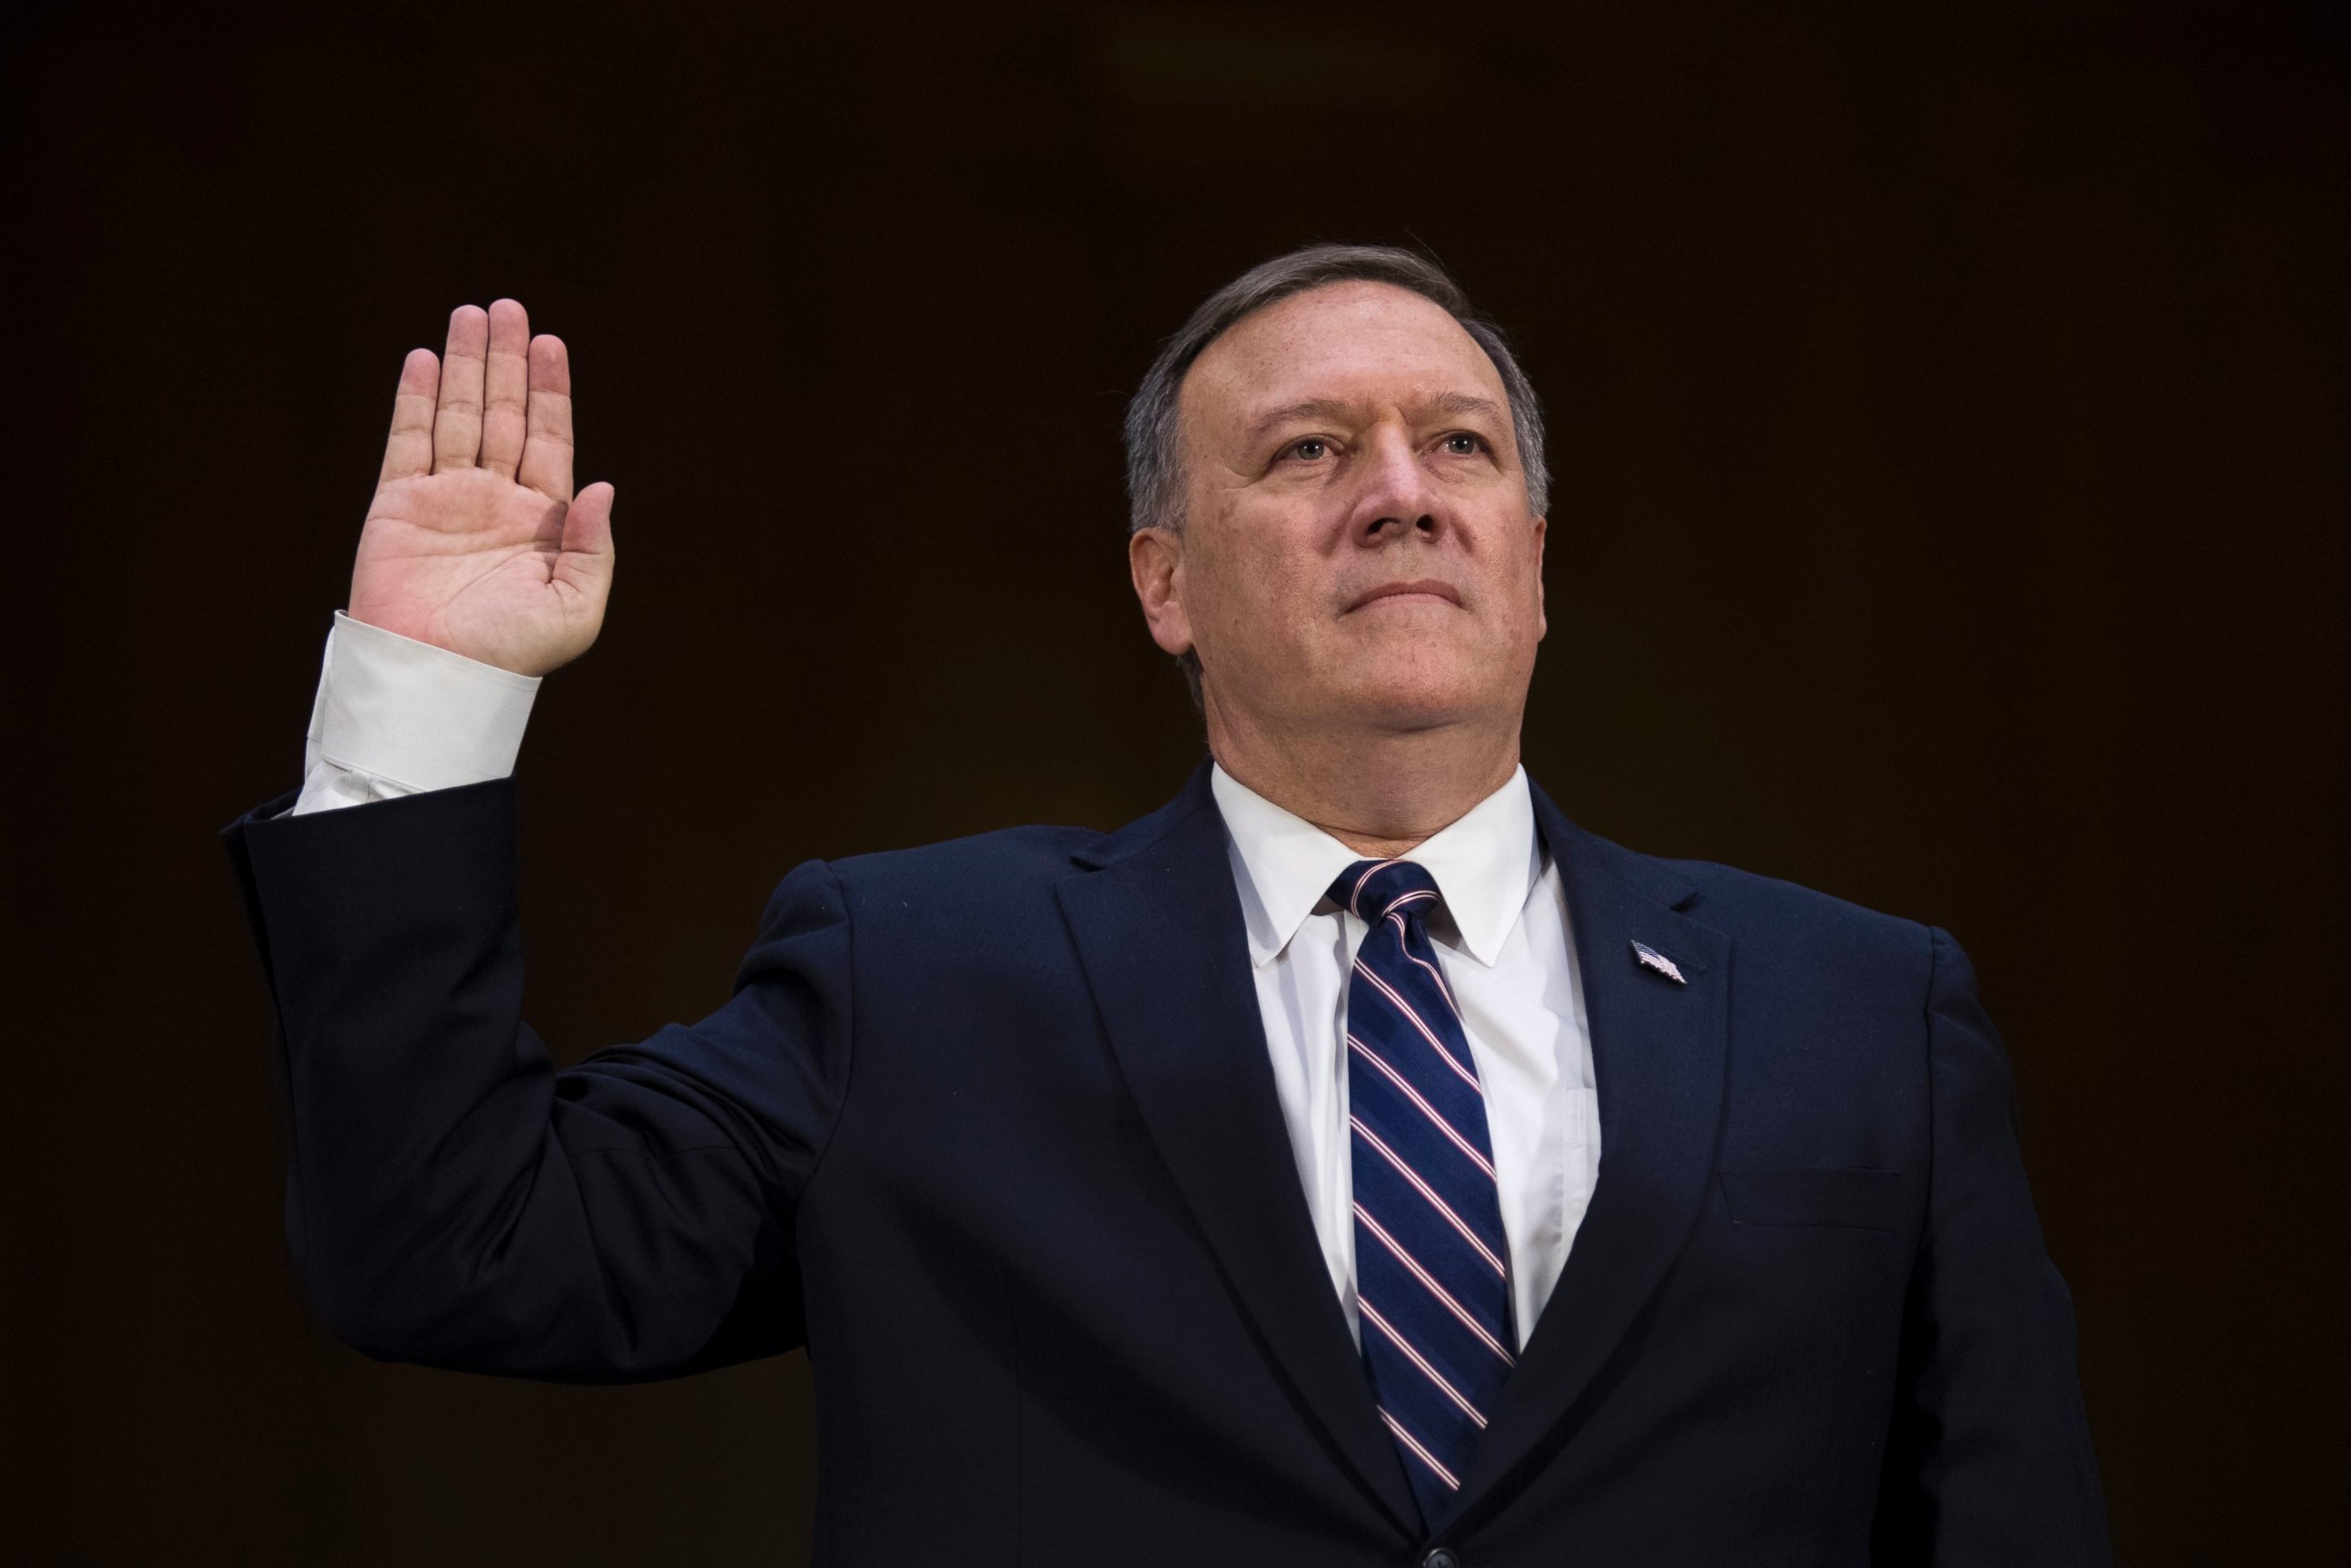 PHOTO: CIA Director nominee Congressman Michael Pompeo is sworn in prior to testifying during his confirmation hearing before Senate Intelligence Committee on Capitol Hill on Jan. 12, 2017.